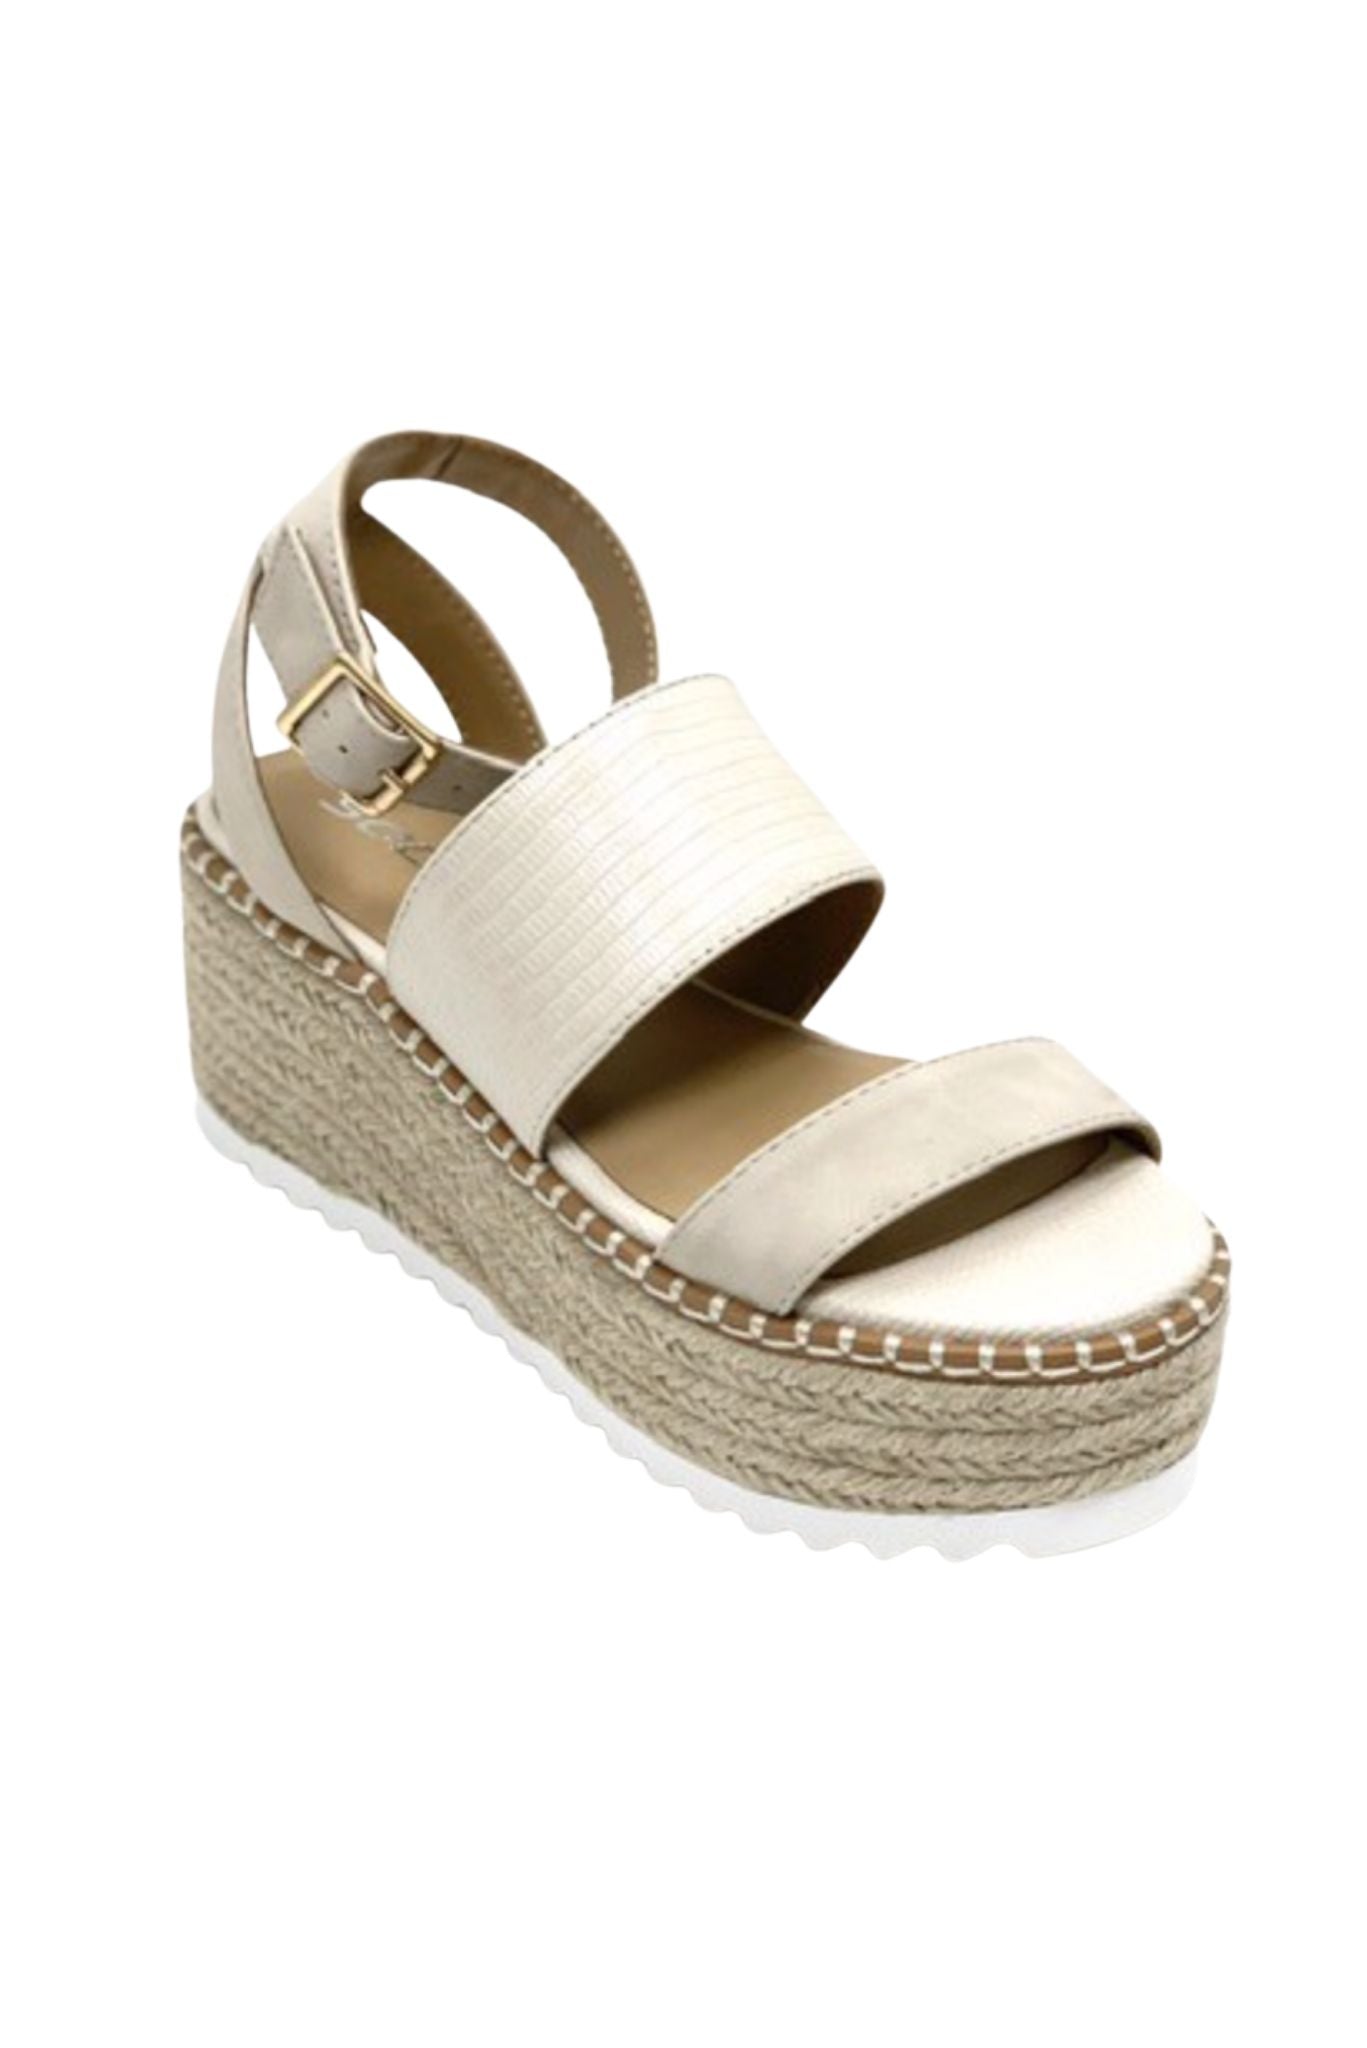 neutral espadrille platform wedges, spring shoes, chloe dupes, alligator wedges, affordable fashion, shop style your senses by mallory fitzsimmons